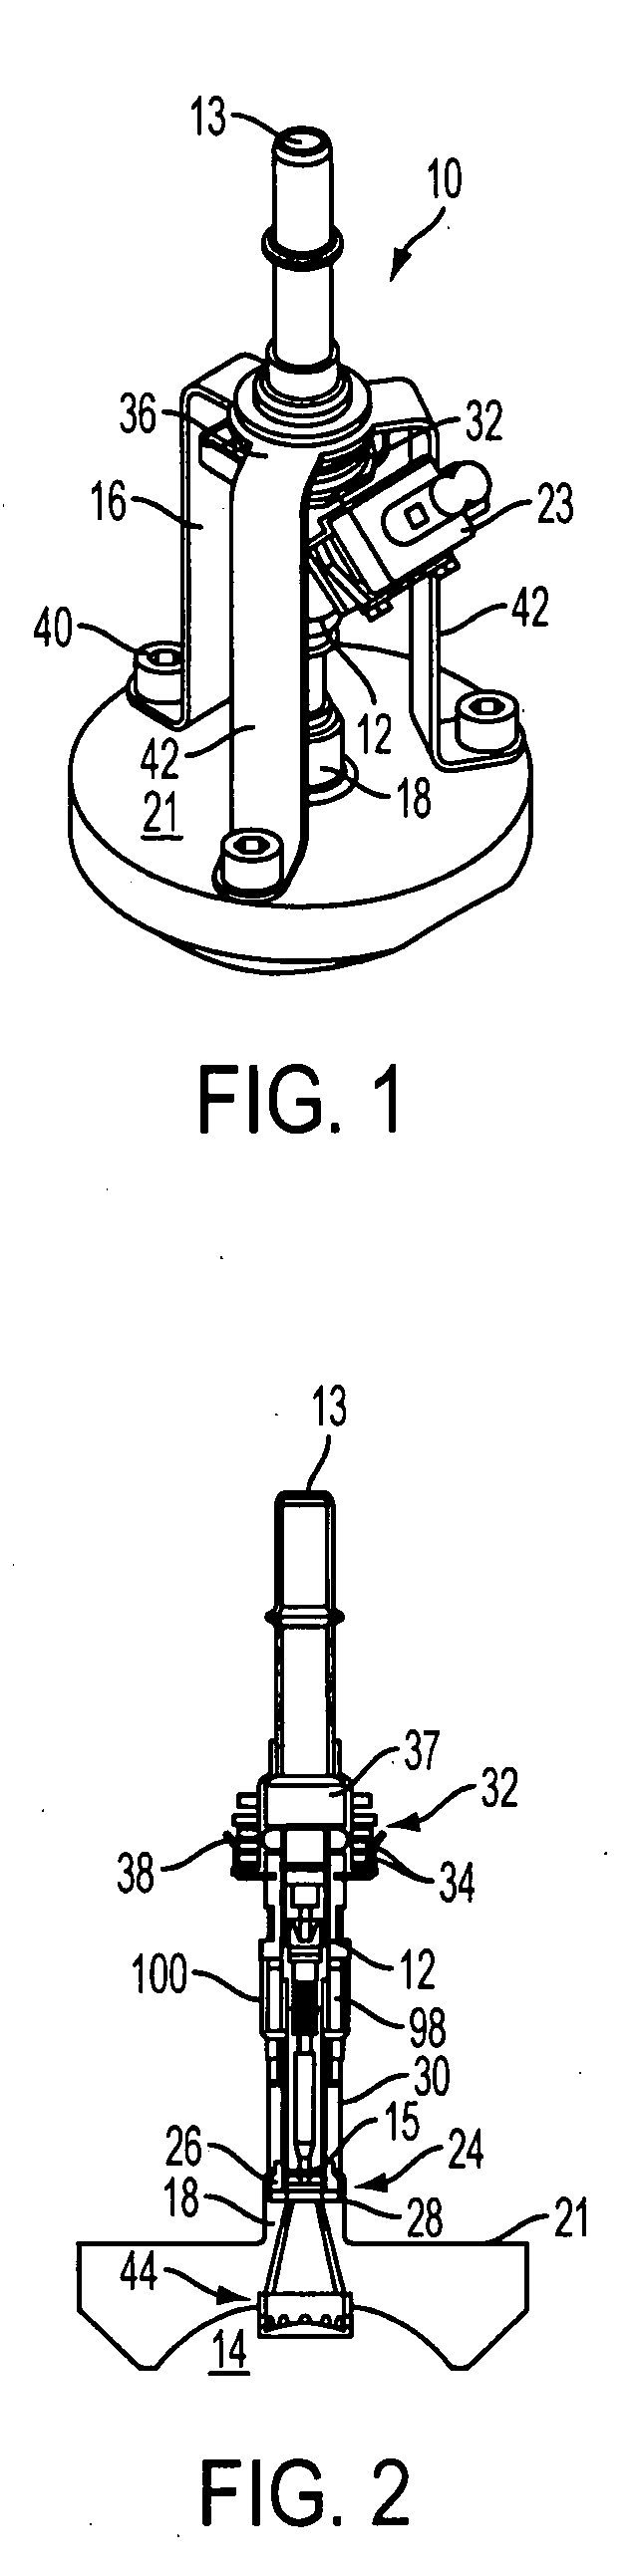 Reductant delivery unit for selective catalytic reduction